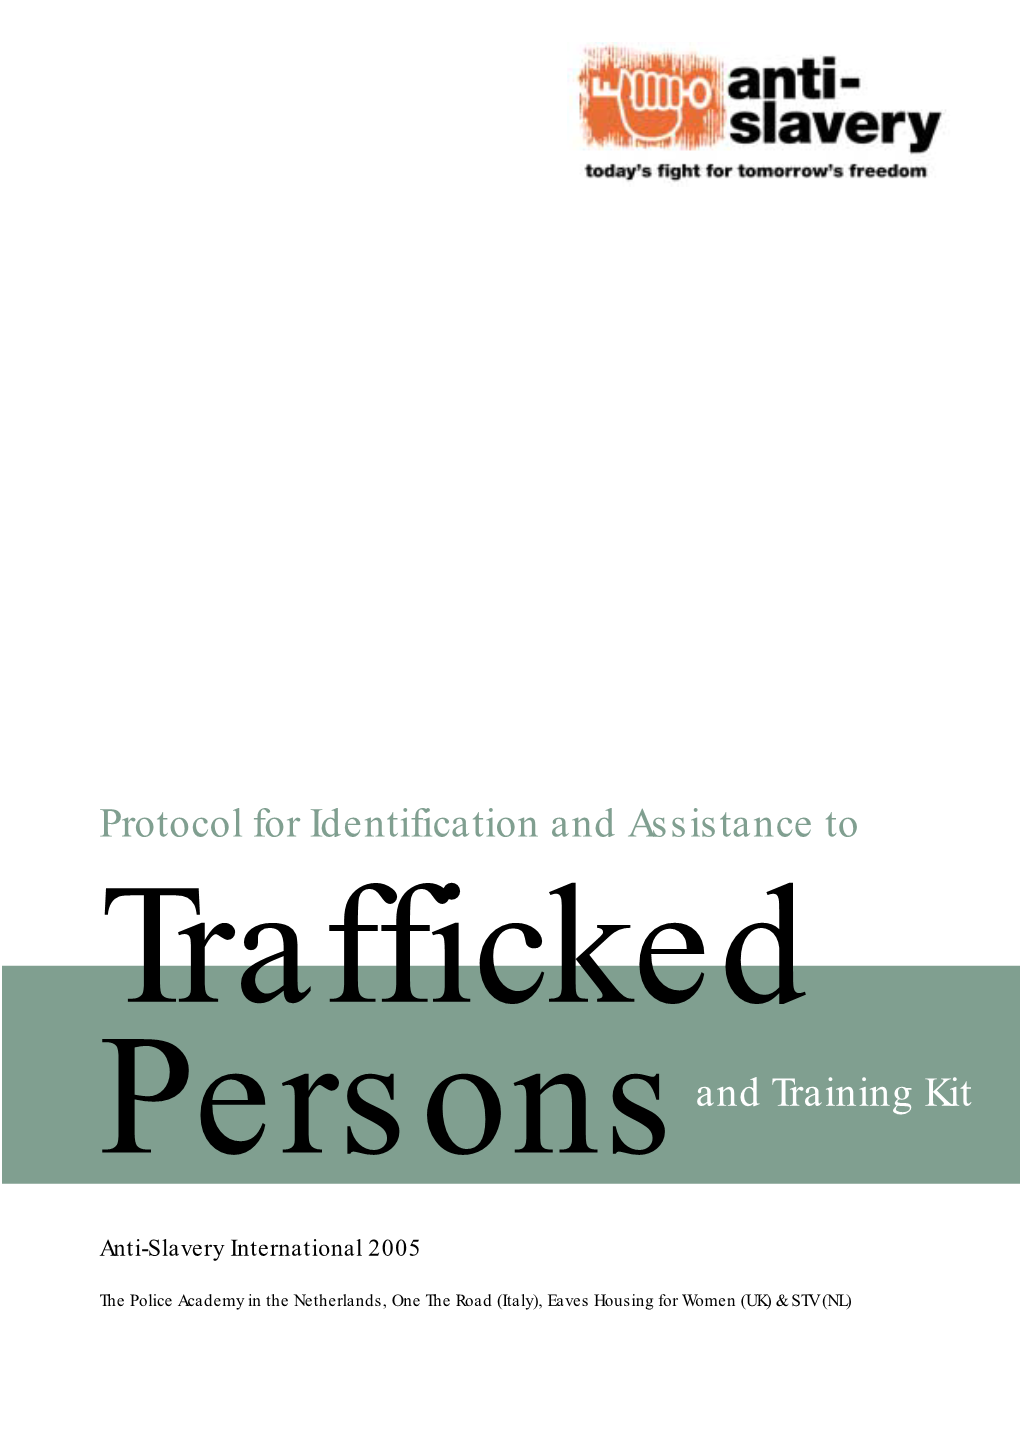 Protocol for Identification and Assistance to Trafficked Persons and Training Kit